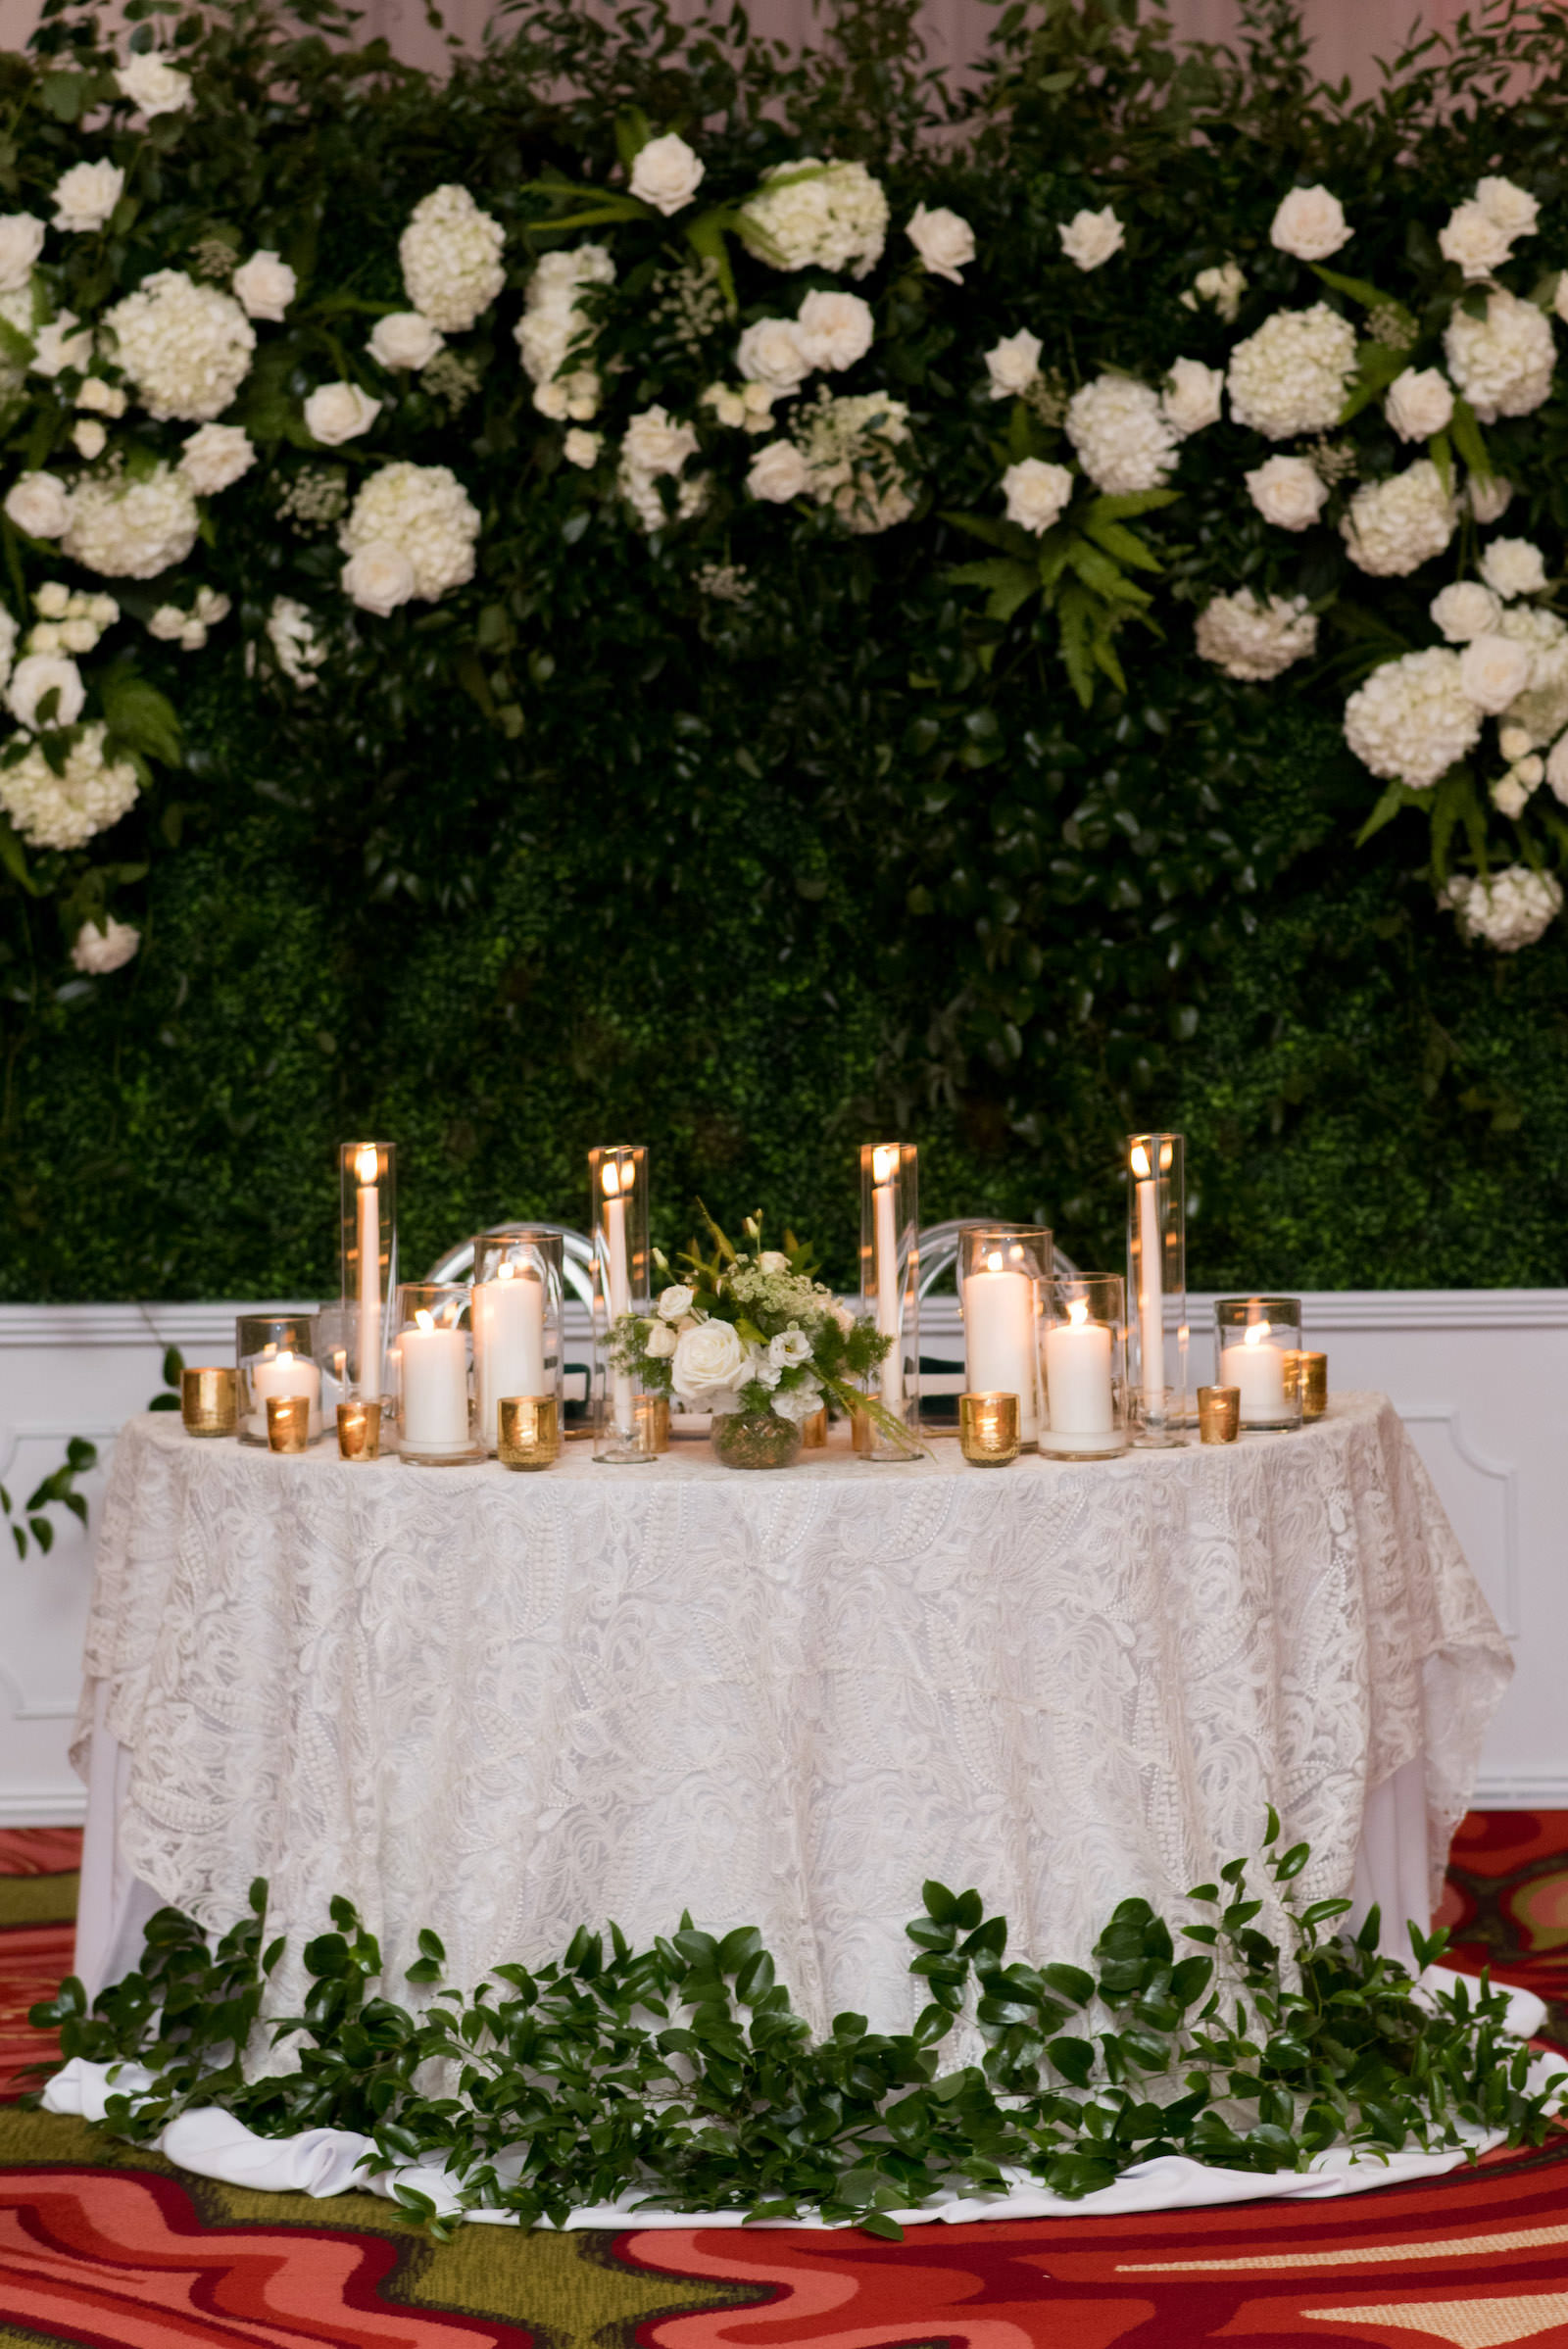 landlord friction cruise Elegant Wedding Reception Decor, Sweetheart Table with Ivory Lace Linen,  Greenery Leaves, Gold and White Candles,